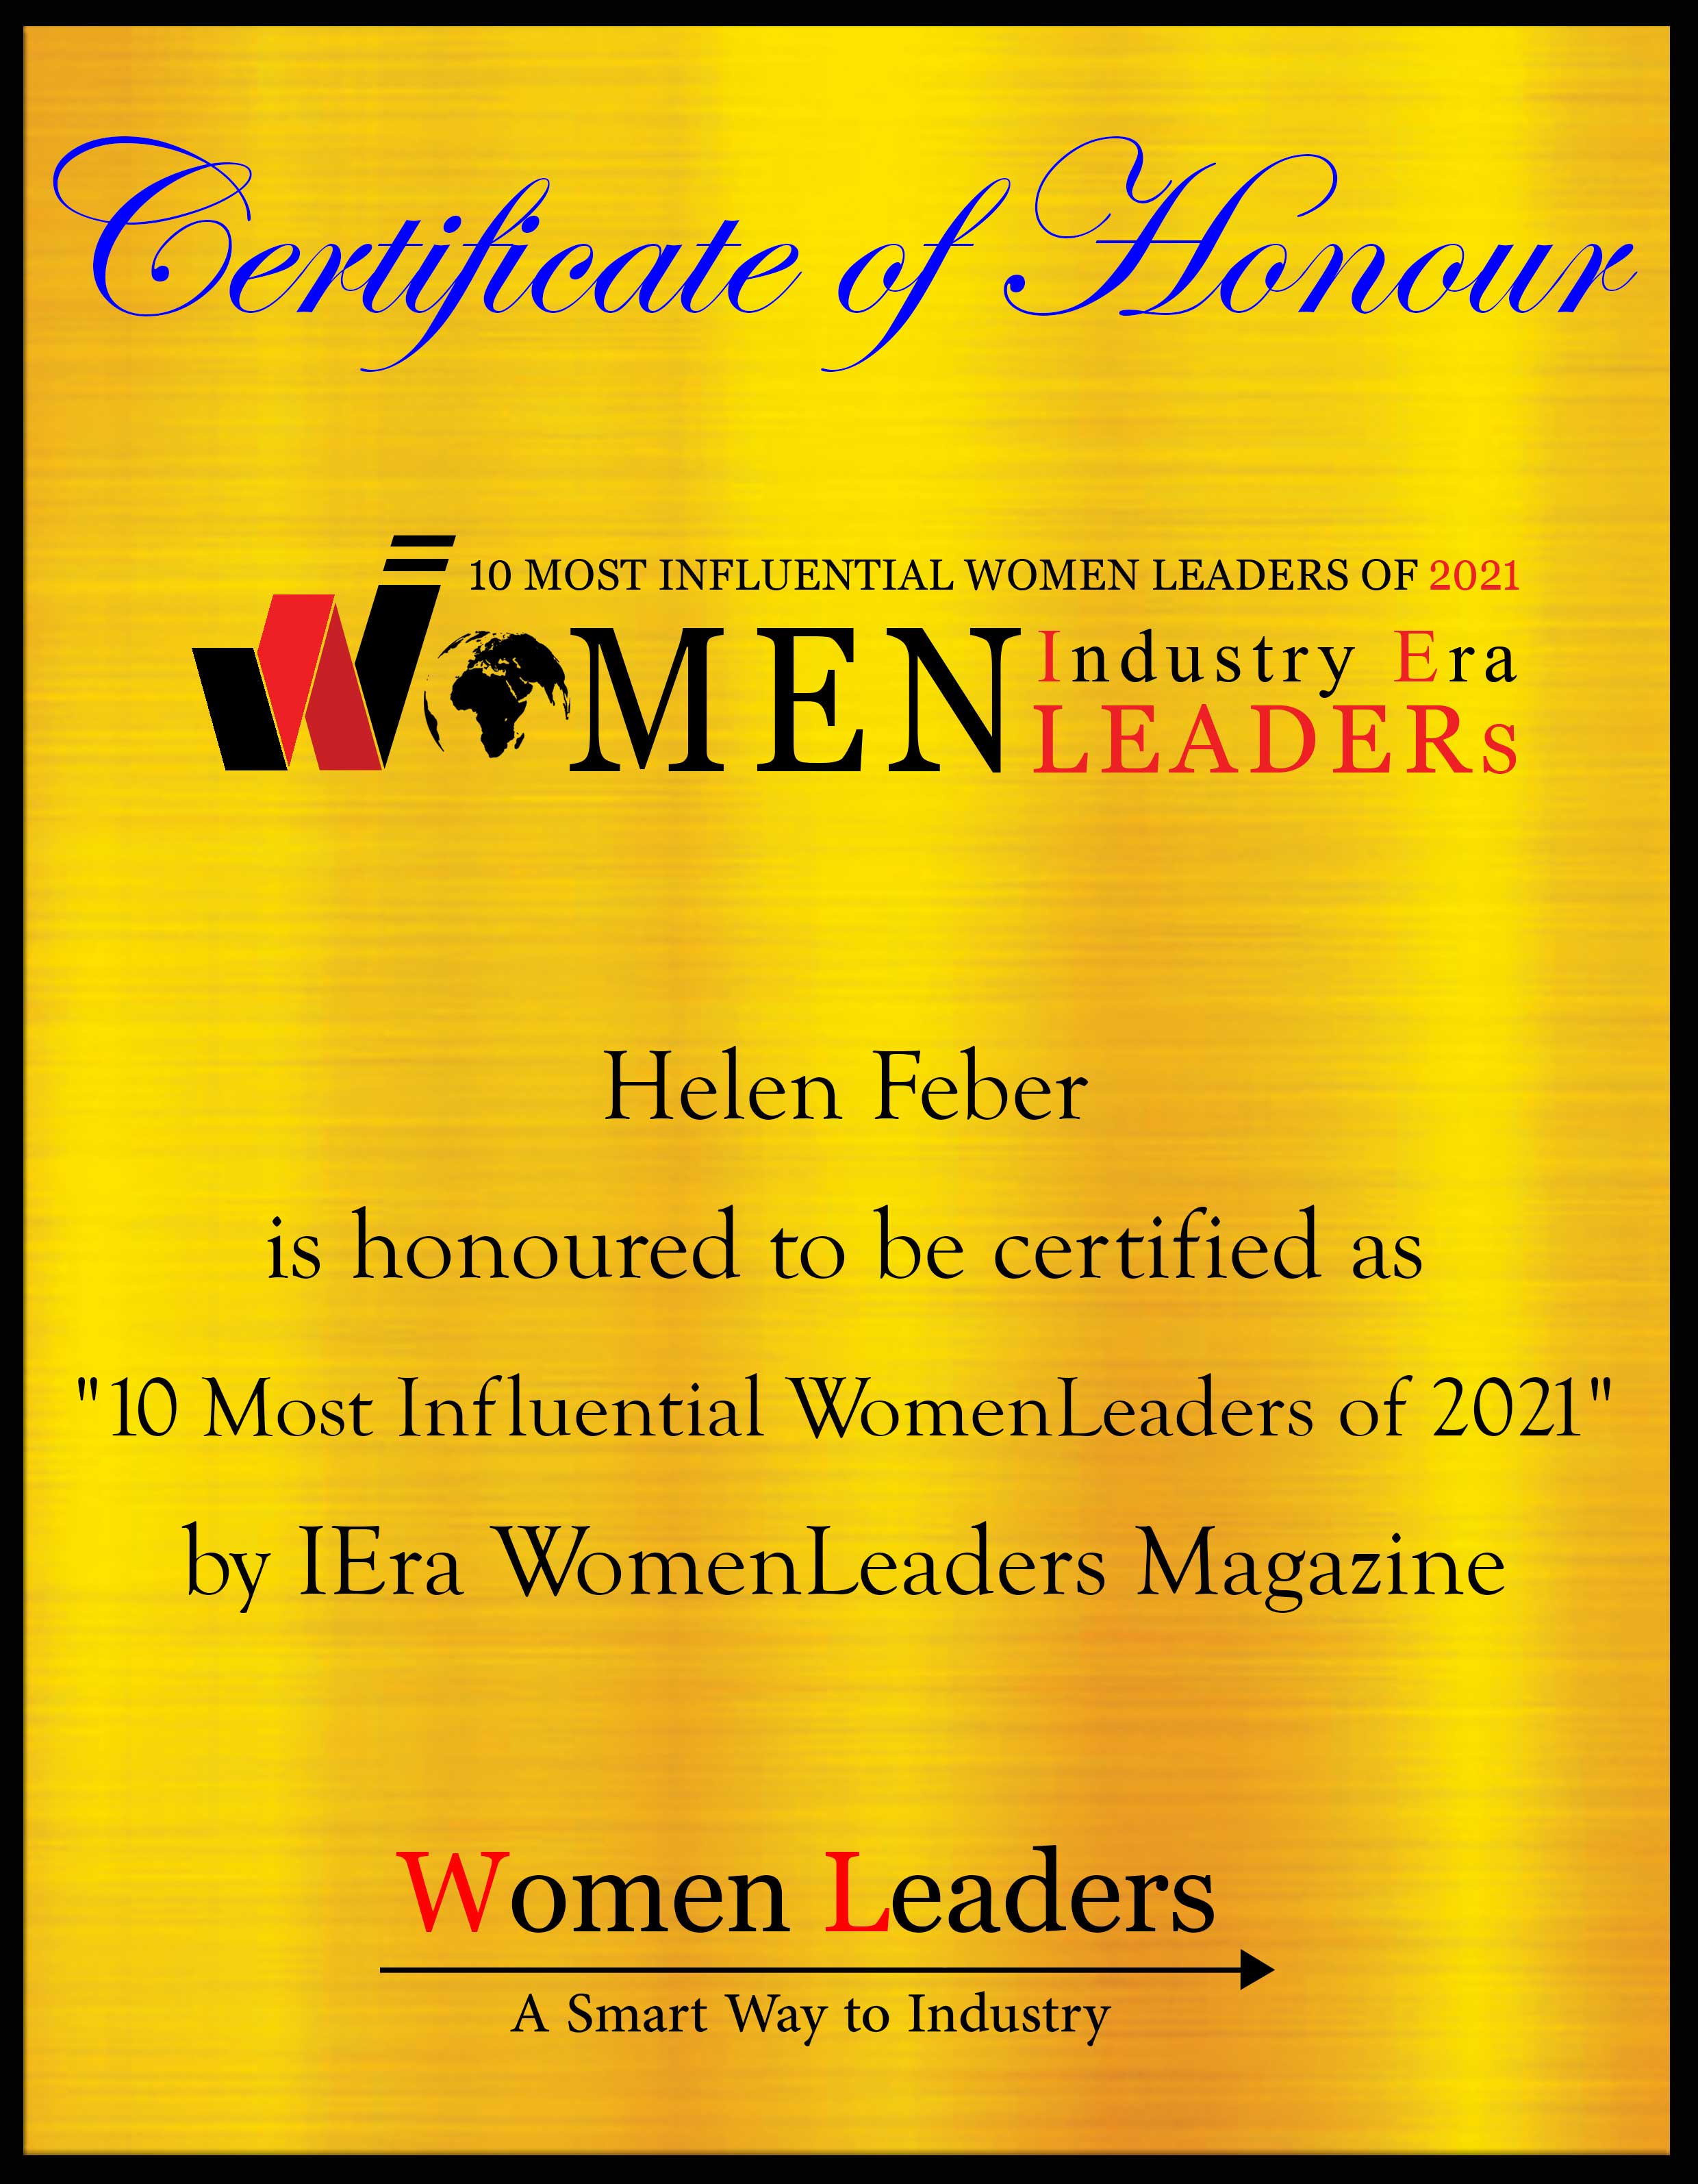 Helen Feber, Managing Partner of Referential, Inc., Most Influential WomenLeaders of 2021